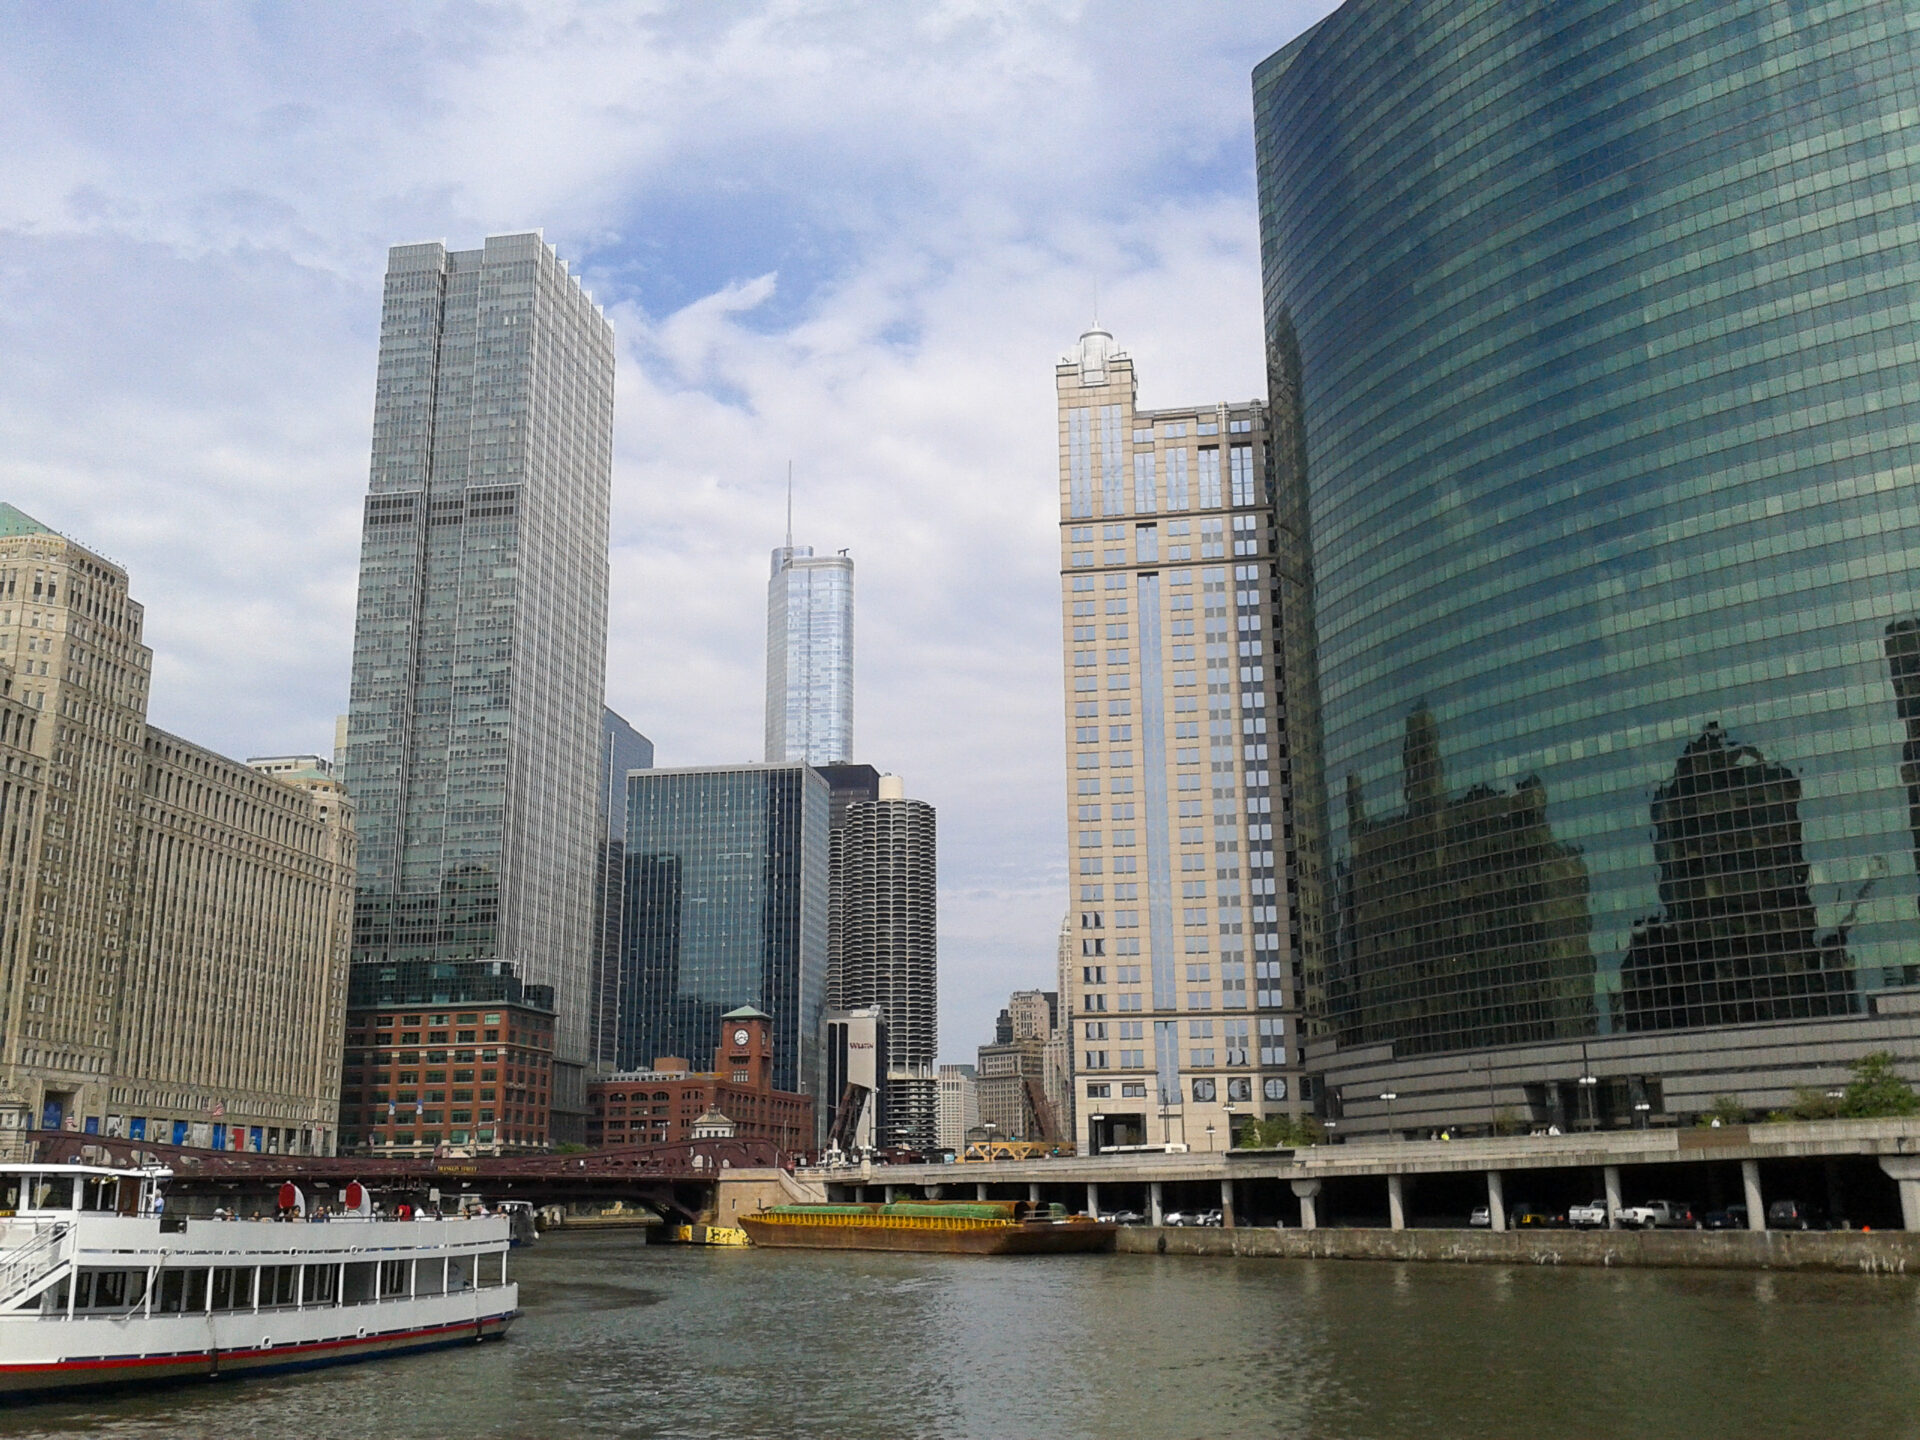 The Chicago River Cruise is a great thing to do in Chicago